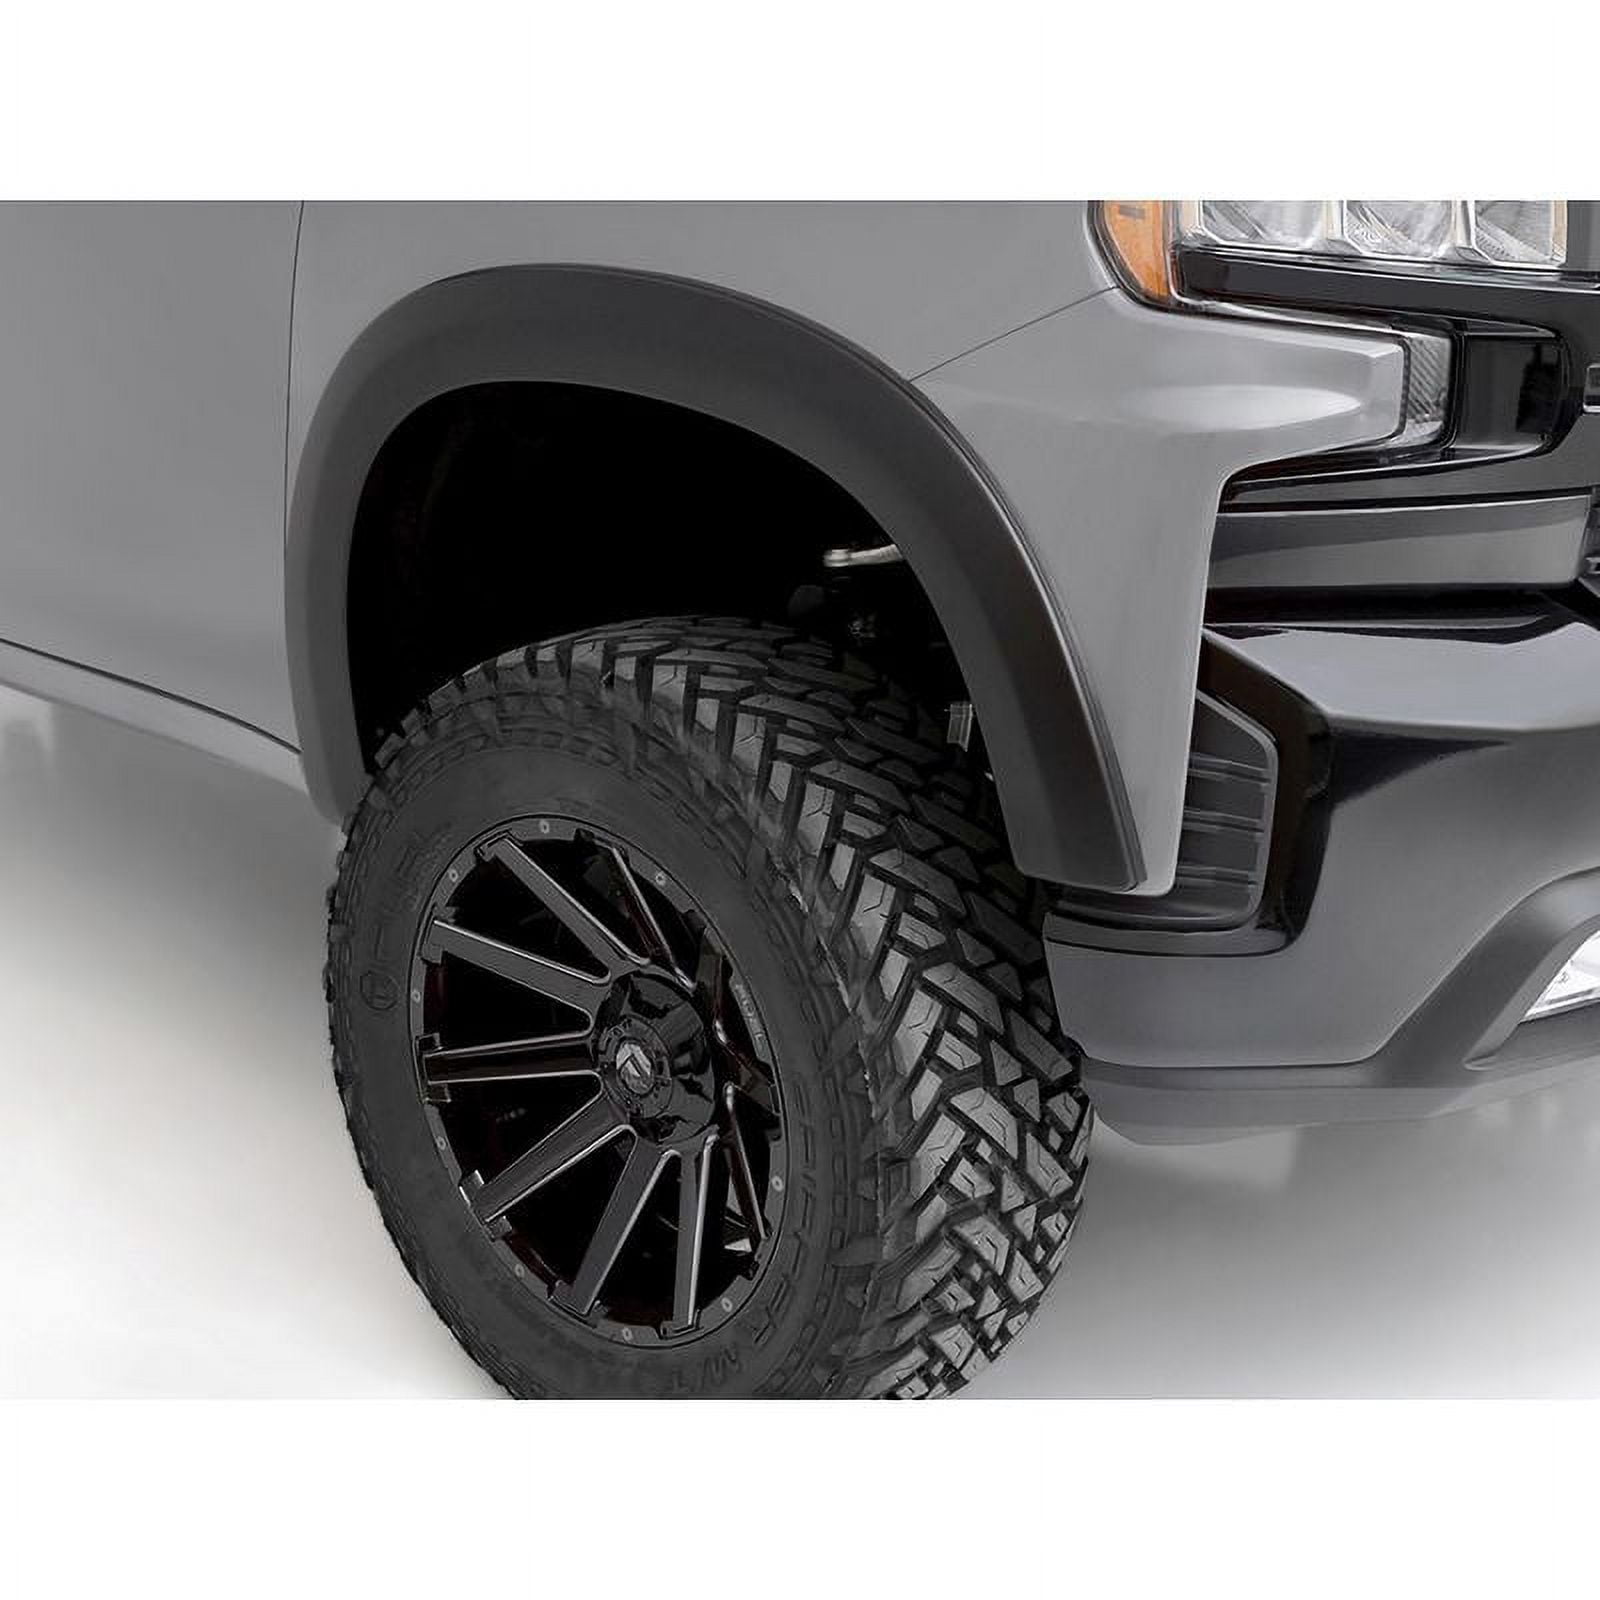  Auto Dynasty 4Pcs Factory Style Paintable Wheel Fender Flares  Compatible With Chevy Silverado GMC Sierra 1500 2500 3500 & Heavy Duty  99-06, Front and Rear, Texured Black : Automotive